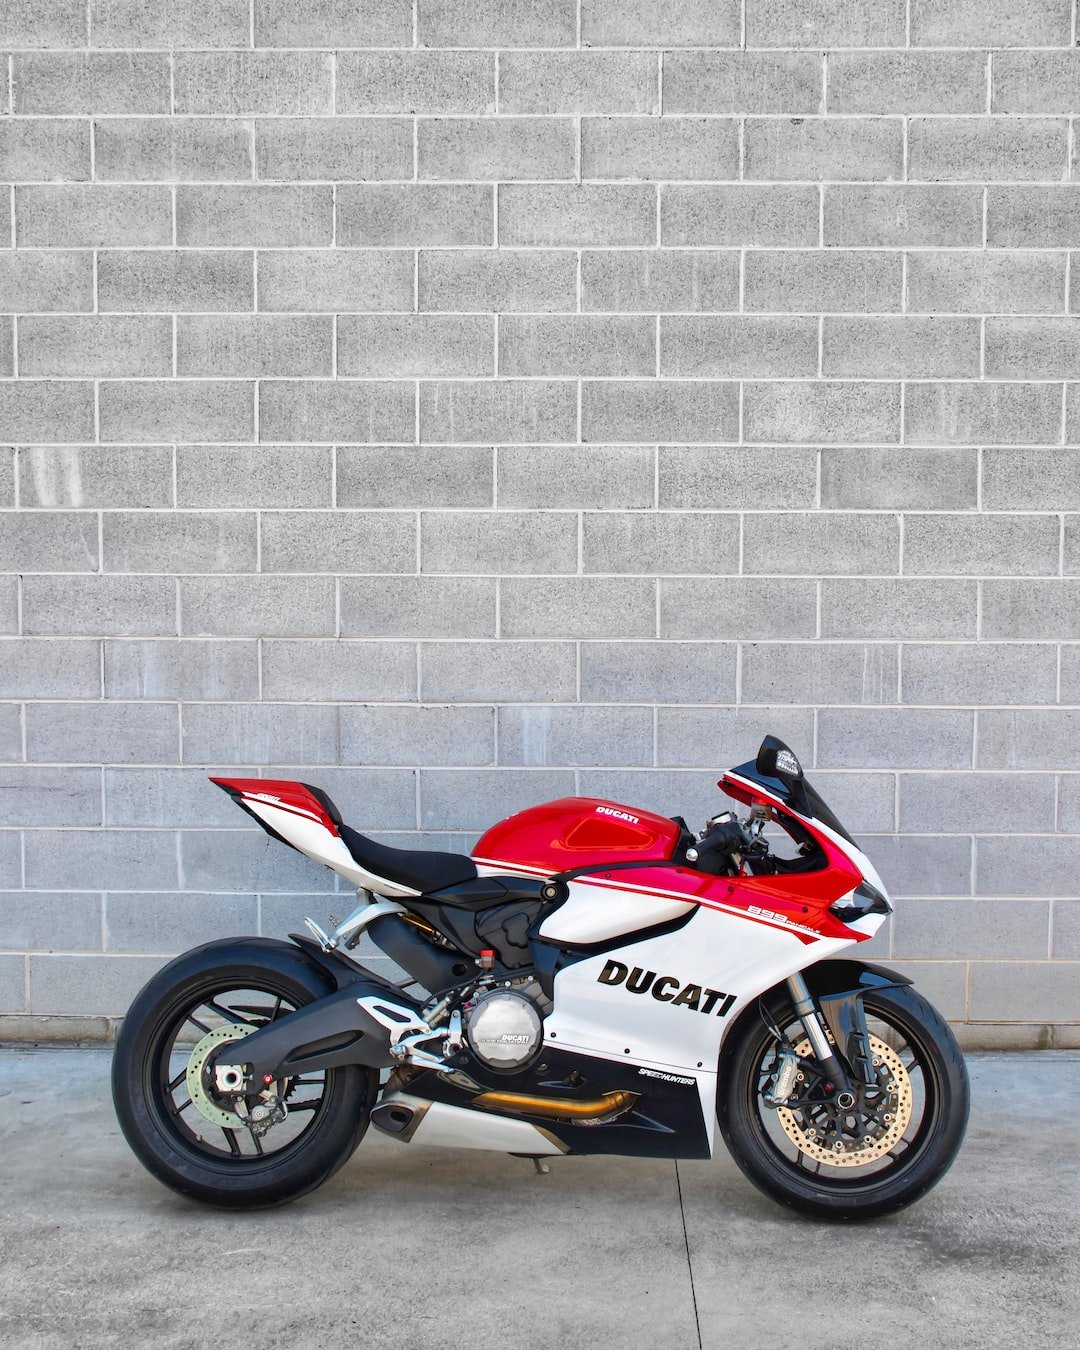 red and black sports bike parked beside white brick wall